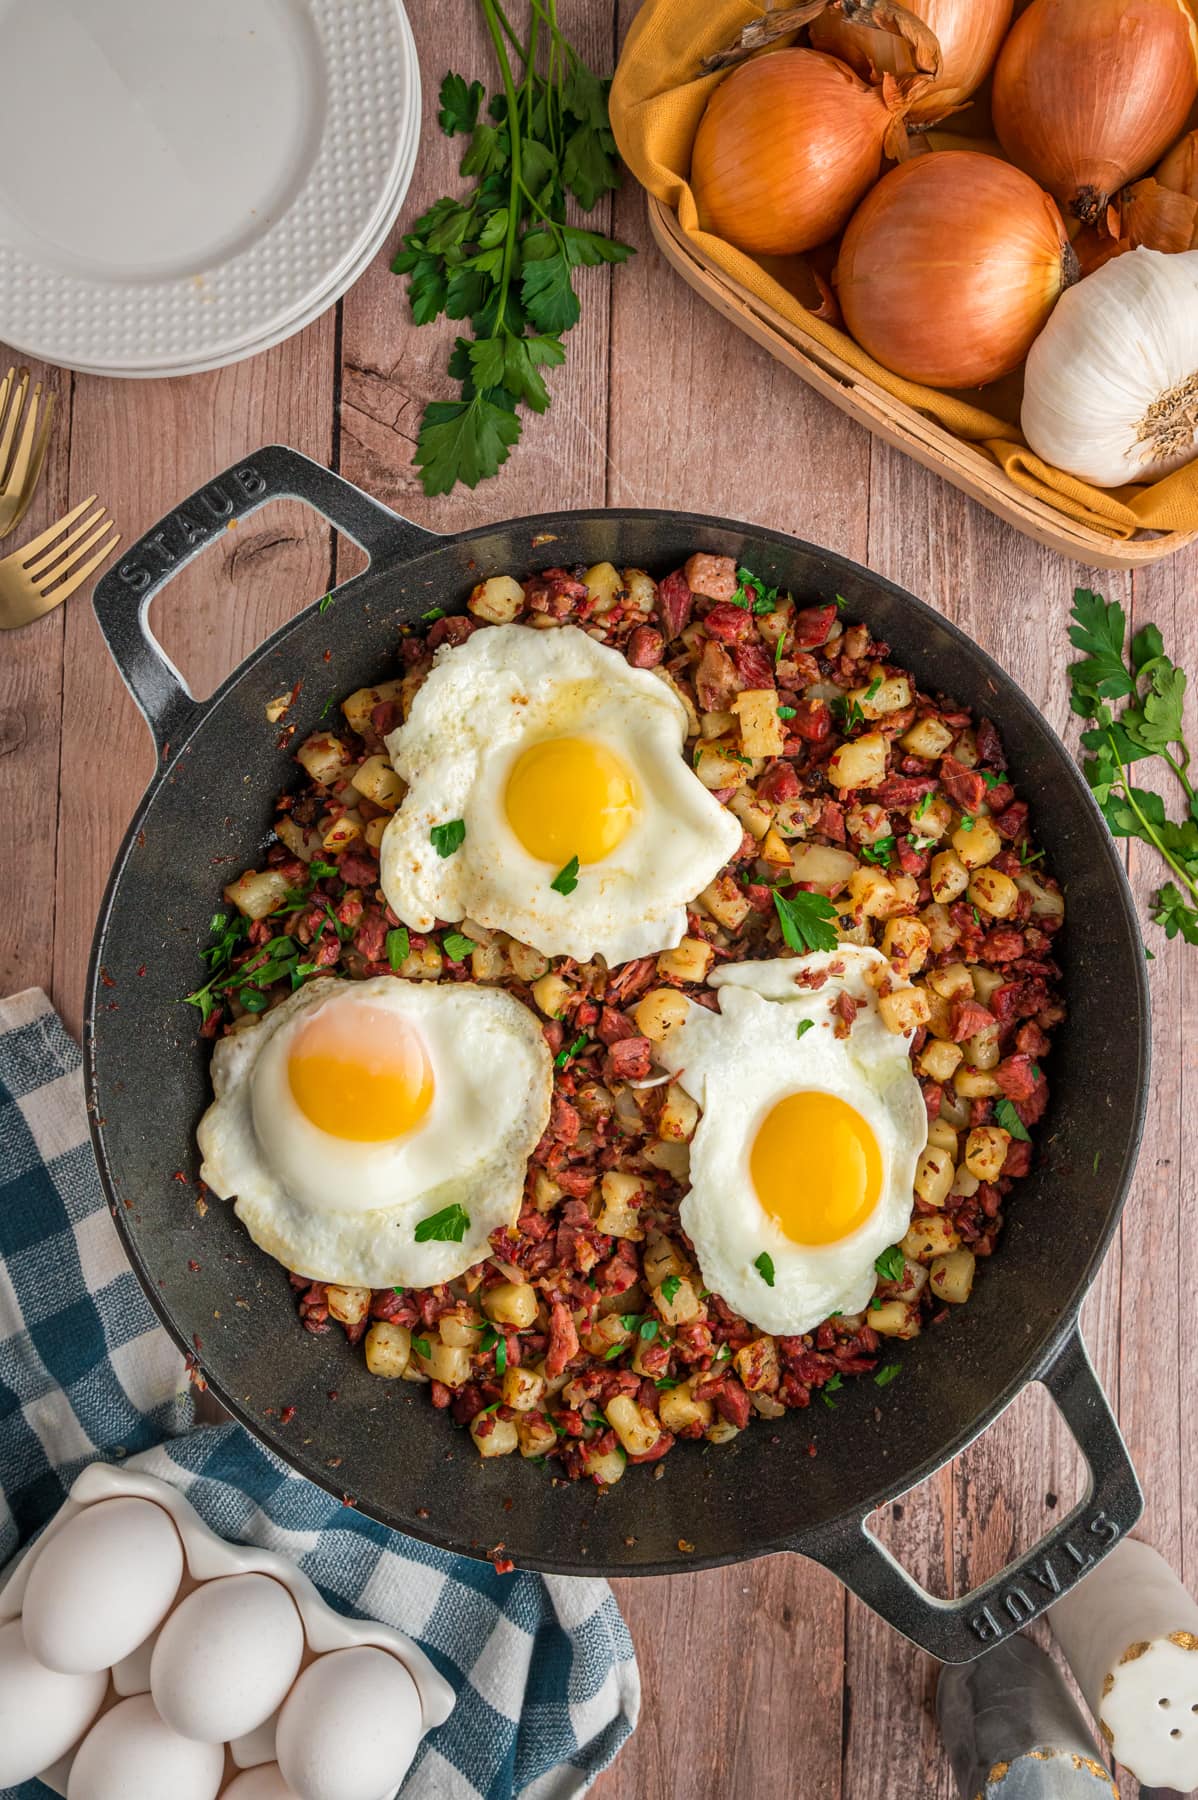 Fried eggs on top of corned beef hash in a cast iron skillet.